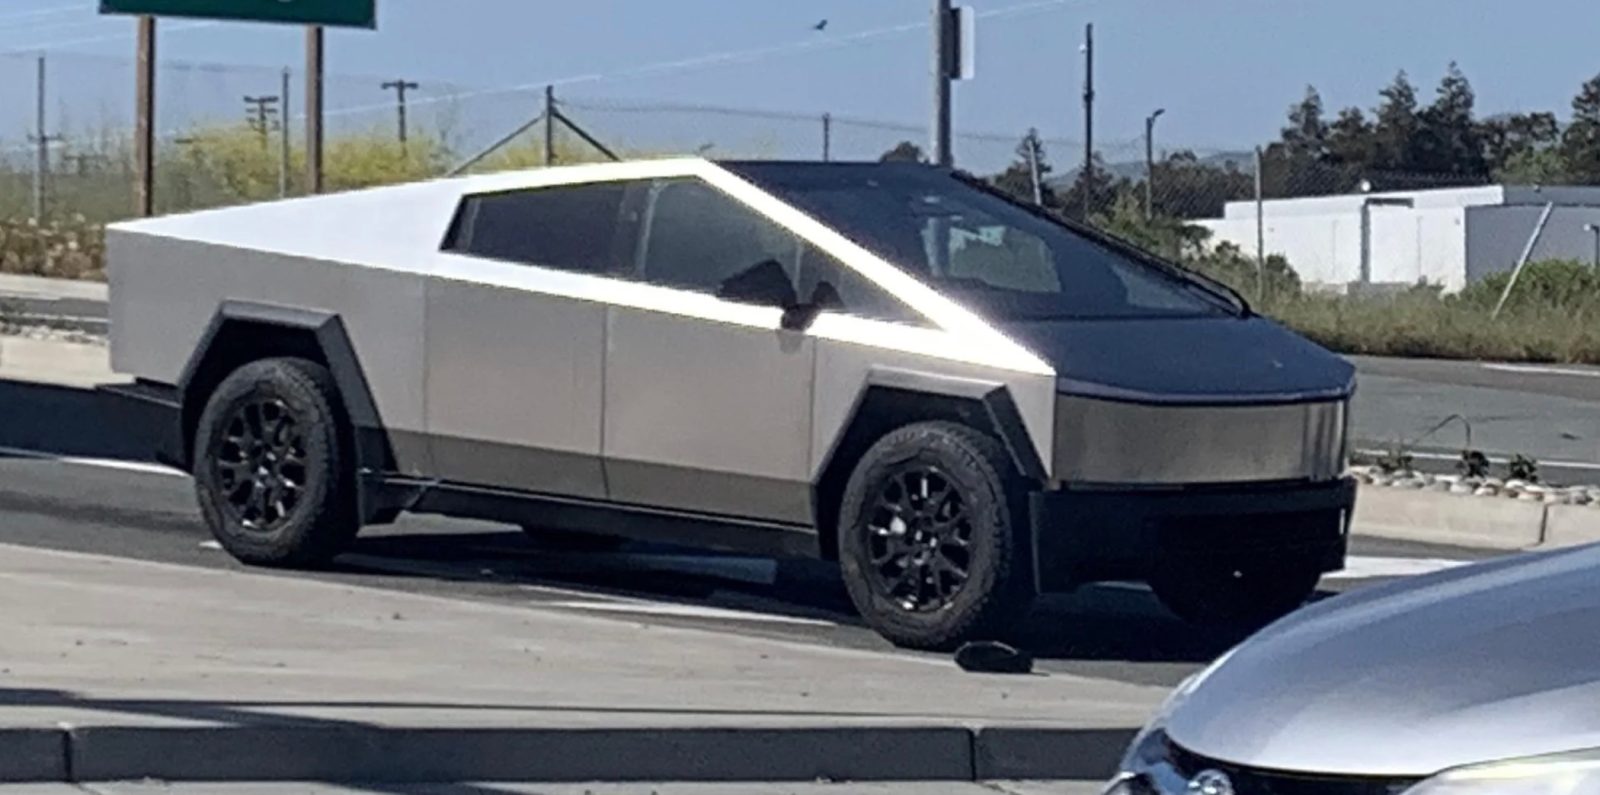 Tesla gives update on Cybertruck, claims first sub-19 ft pickup with 4 doors & 6+ ft bed